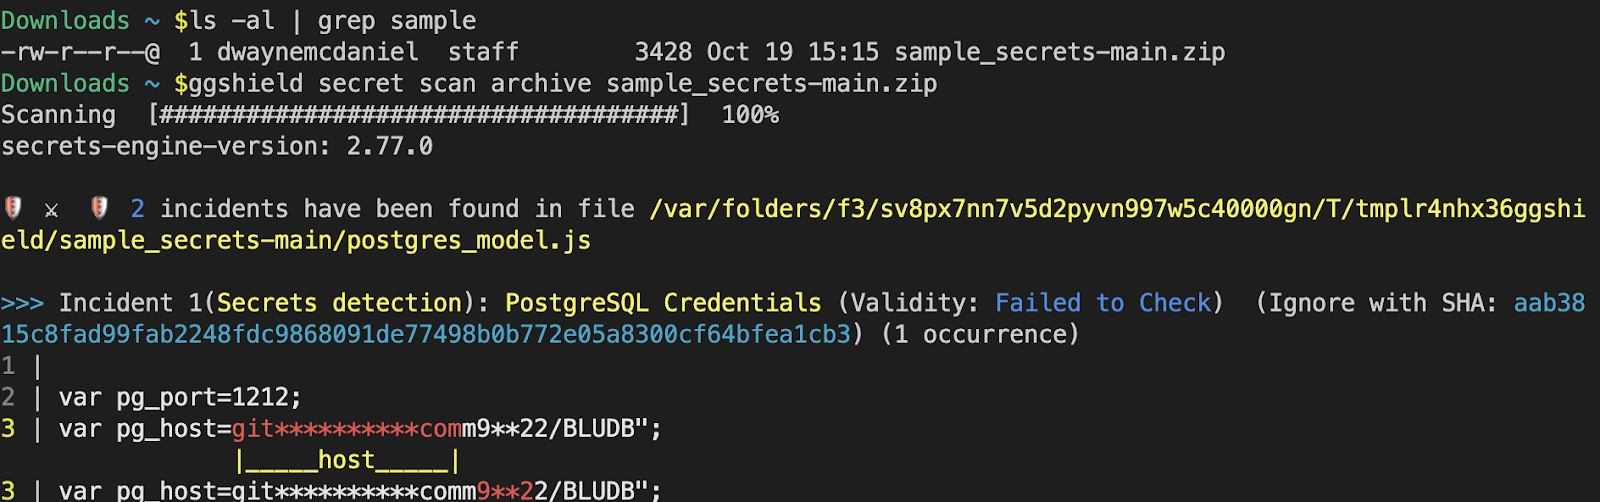 l s command showing sample_secrets-main.zip and the output of ggshield secret scan archive sample_secrets-main.zip finding a secret.